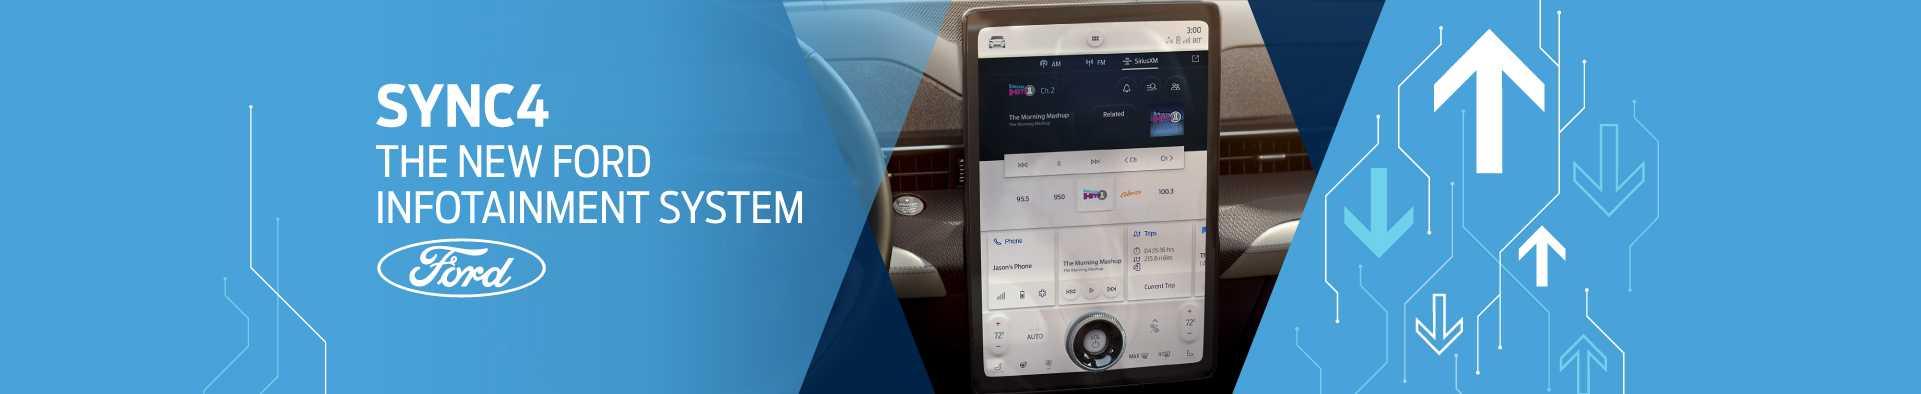 SYNC4 : The new Ford infotainment system